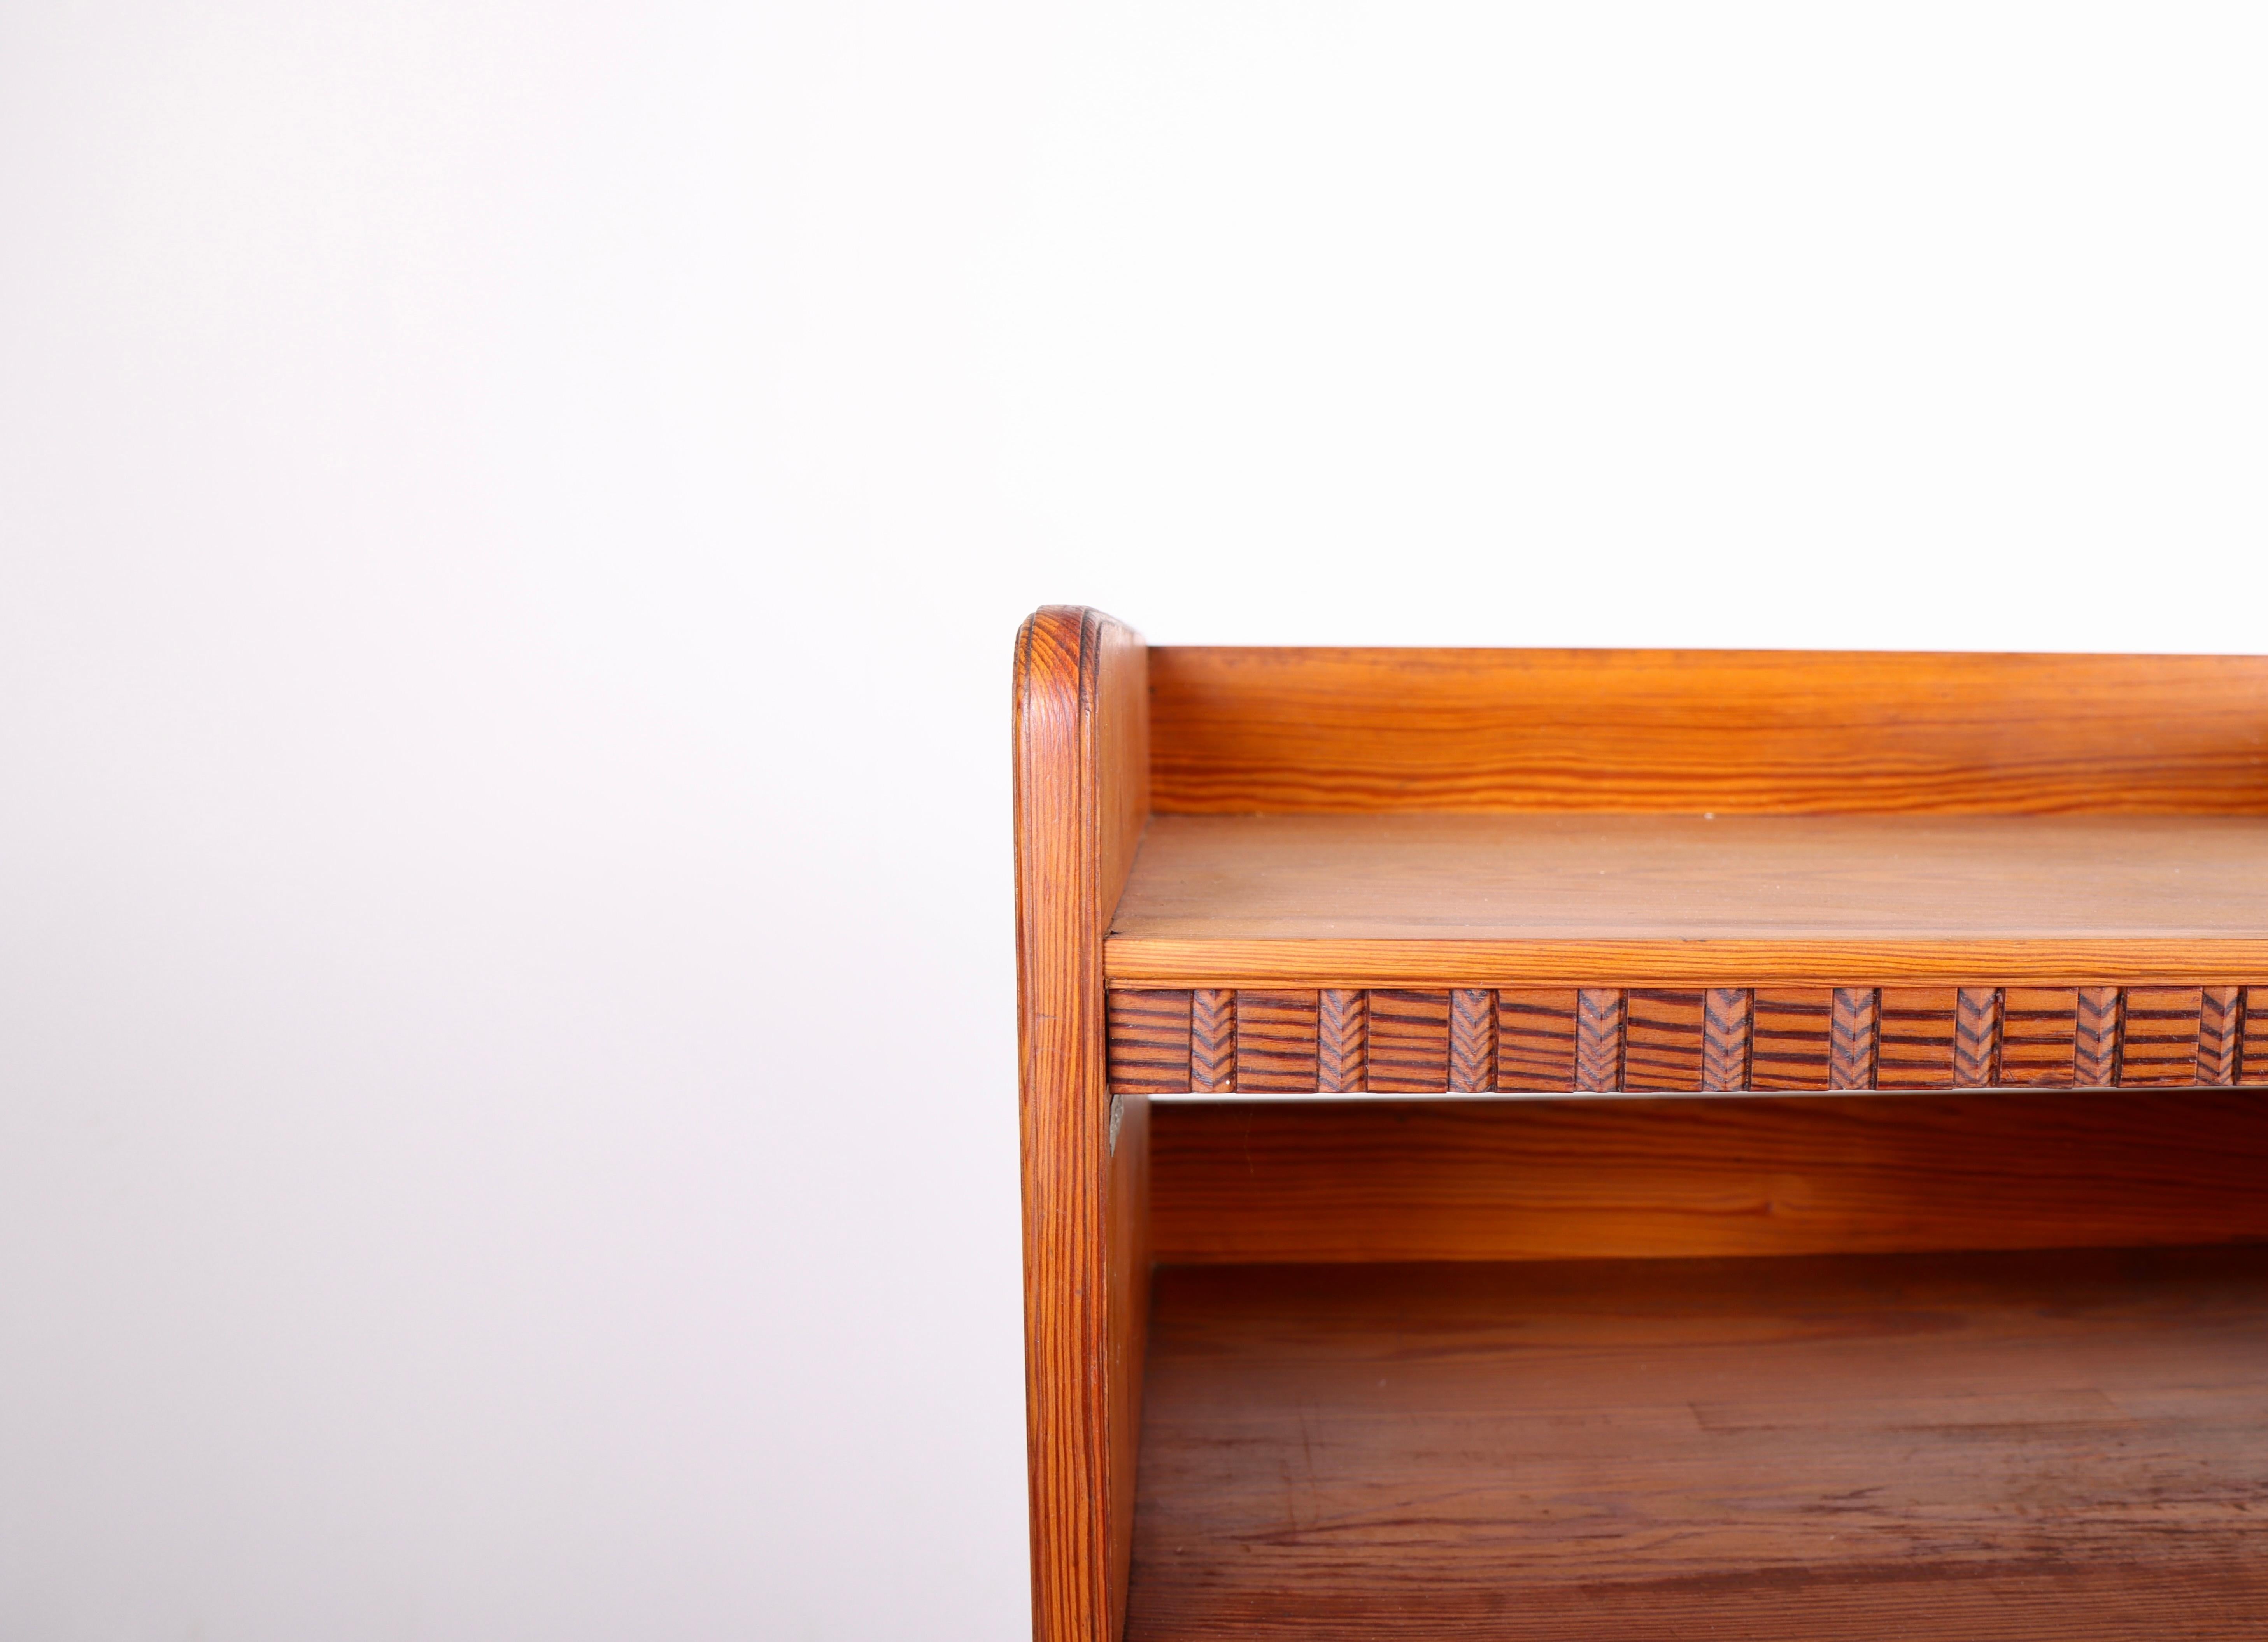 Danish Bookcase Solid in Patinated Pine Designed by Martin Nyrop for Rud Rasmussen For Sale